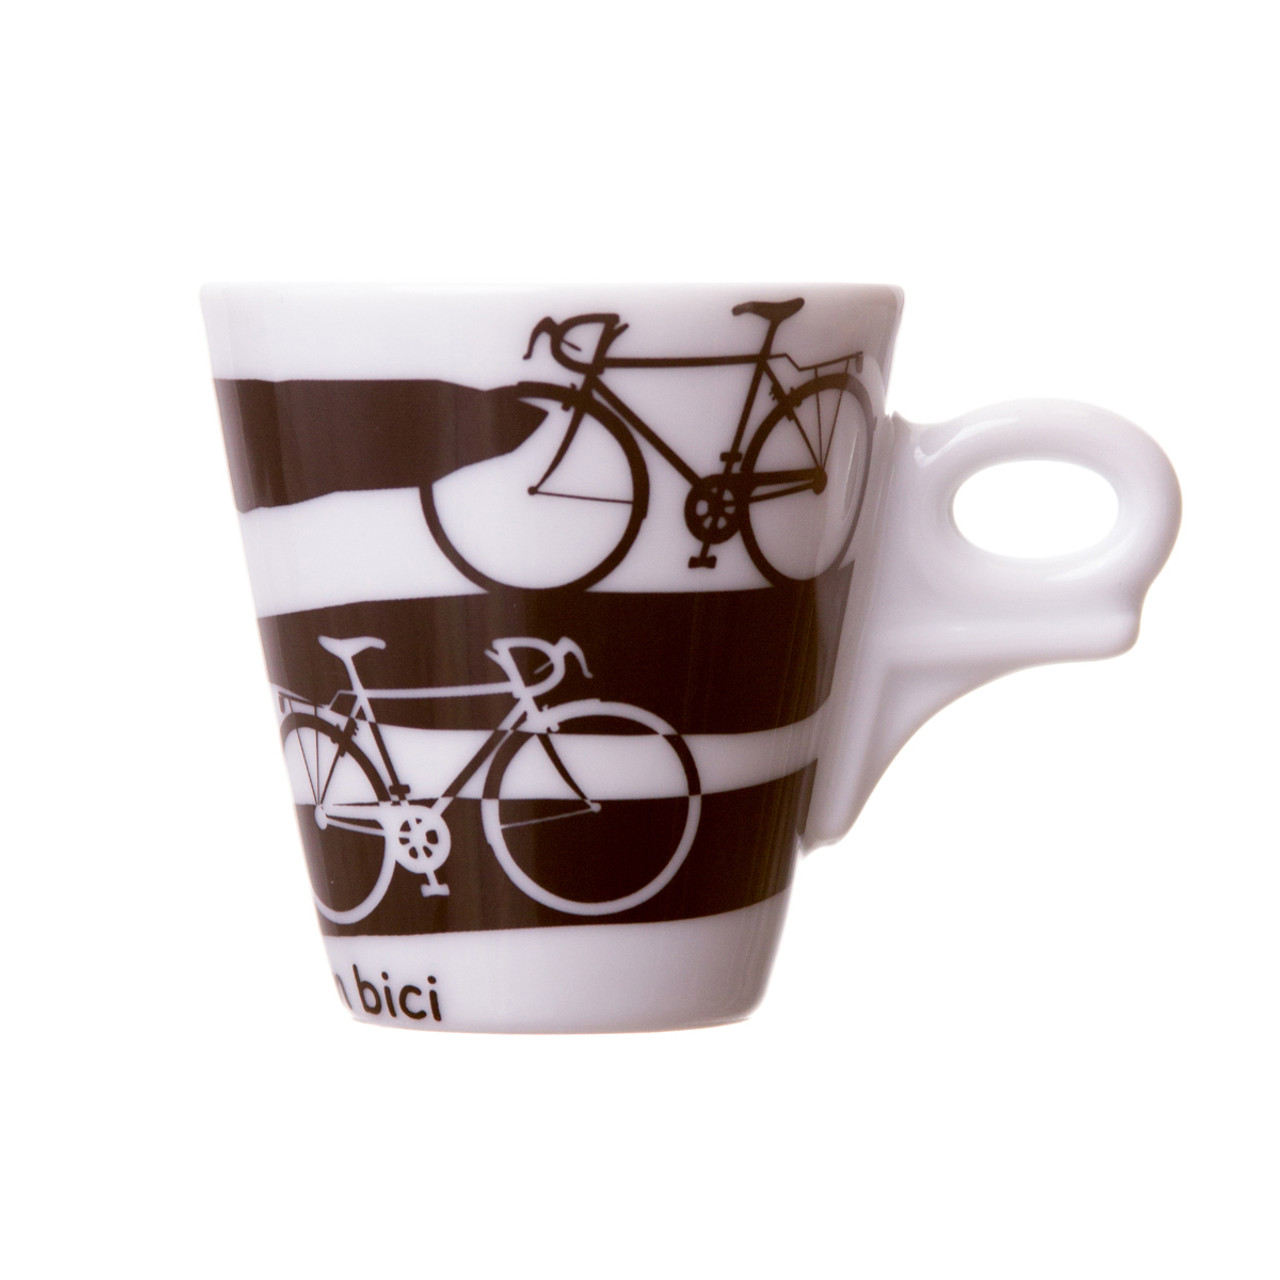 https://cdn11.bigcommerce.com/s-6h7ychjk4/images/stencil/1280x1280/products/8163/89213/italia-in-bici-espresso-cup-2-side__14022.1597181596.jpg?c=1&imbypass=on